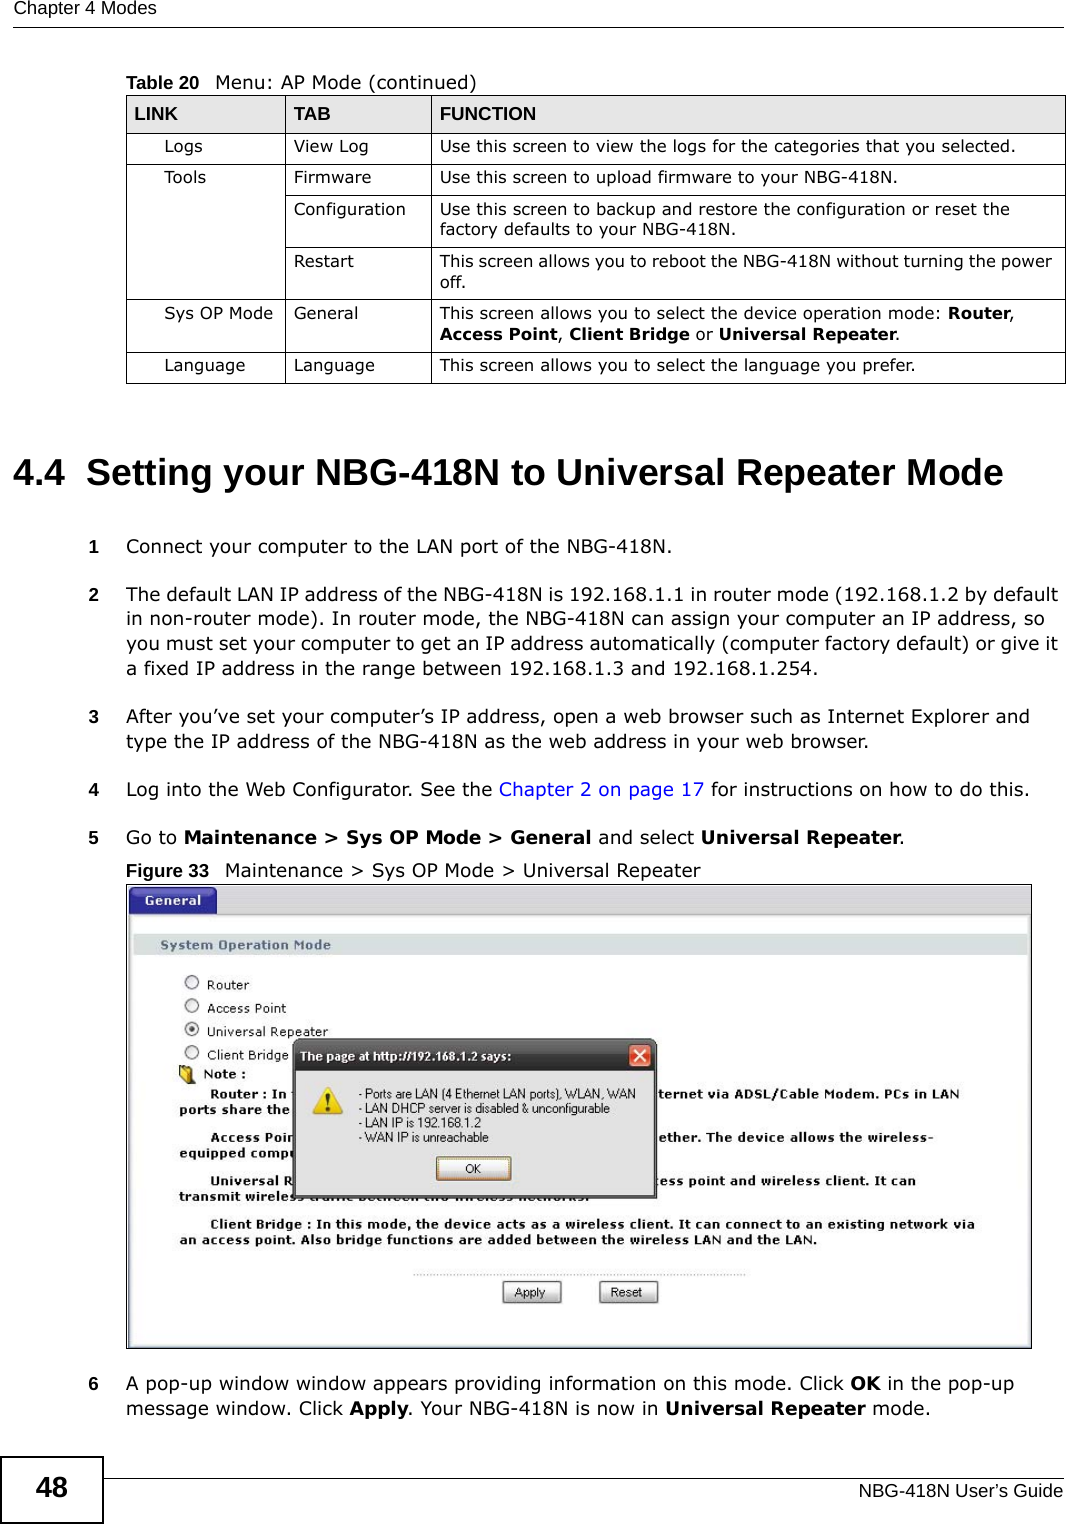 Chapter 4 ModesNBG-418N User’s Guide484.4  Setting your NBG-418N to Universal Repeater Mode1Connect your computer to the LAN port of the NBG-418N. 2The default LAN IP address of the NBG-418N is 192.168.1.1 in router mode (192.168.1.2 by default in non-router mode). In router mode, the NBG-418N can assign your computer an IP address, so you must set your computer to get an IP address automatically (computer factory default) or give it a fixed IP address in the range between 192.168.1.3 and 192.168.1.254.3After you’ve set your computer’s IP address, open a web browser such as Internet Explorer and type the IP address of the NBG-418N as the web address in your web browser.4Log into the Web Configurator. See the Chapter 2 on page 17 for instructions on how to do this.5Go to Maintenance &gt; Sys OP Mode &gt; General and select Universal Repeater.Figure 33   Maintenance &gt; Sys OP Mode &gt; Universal Repeater6A pop-up window window appears providing information on this mode. Click OK in the pop-up message window. Click Apply. Your NBG-418N is now in Universal Repeater mode.Logs View Log Use this screen to view the logs for the categories that you selected.Tools Firmware Use this screen to upload firmware to your NBG-418N.Configuration Use this screen to backup and restore the configuration or reset the factory defaults to your NBG-418N. Restart This screen allows you to reboot the NBG-418N without turning the power off.Sys OP Mode General This screen allows you to select the device operation mode: Router, Access Point, Client Bridge or Universal Repeater.Language Language This screen allows you to select the language you prefer.Table 20   Menu: AP Mode (continued)LINK TAB FUNCTION